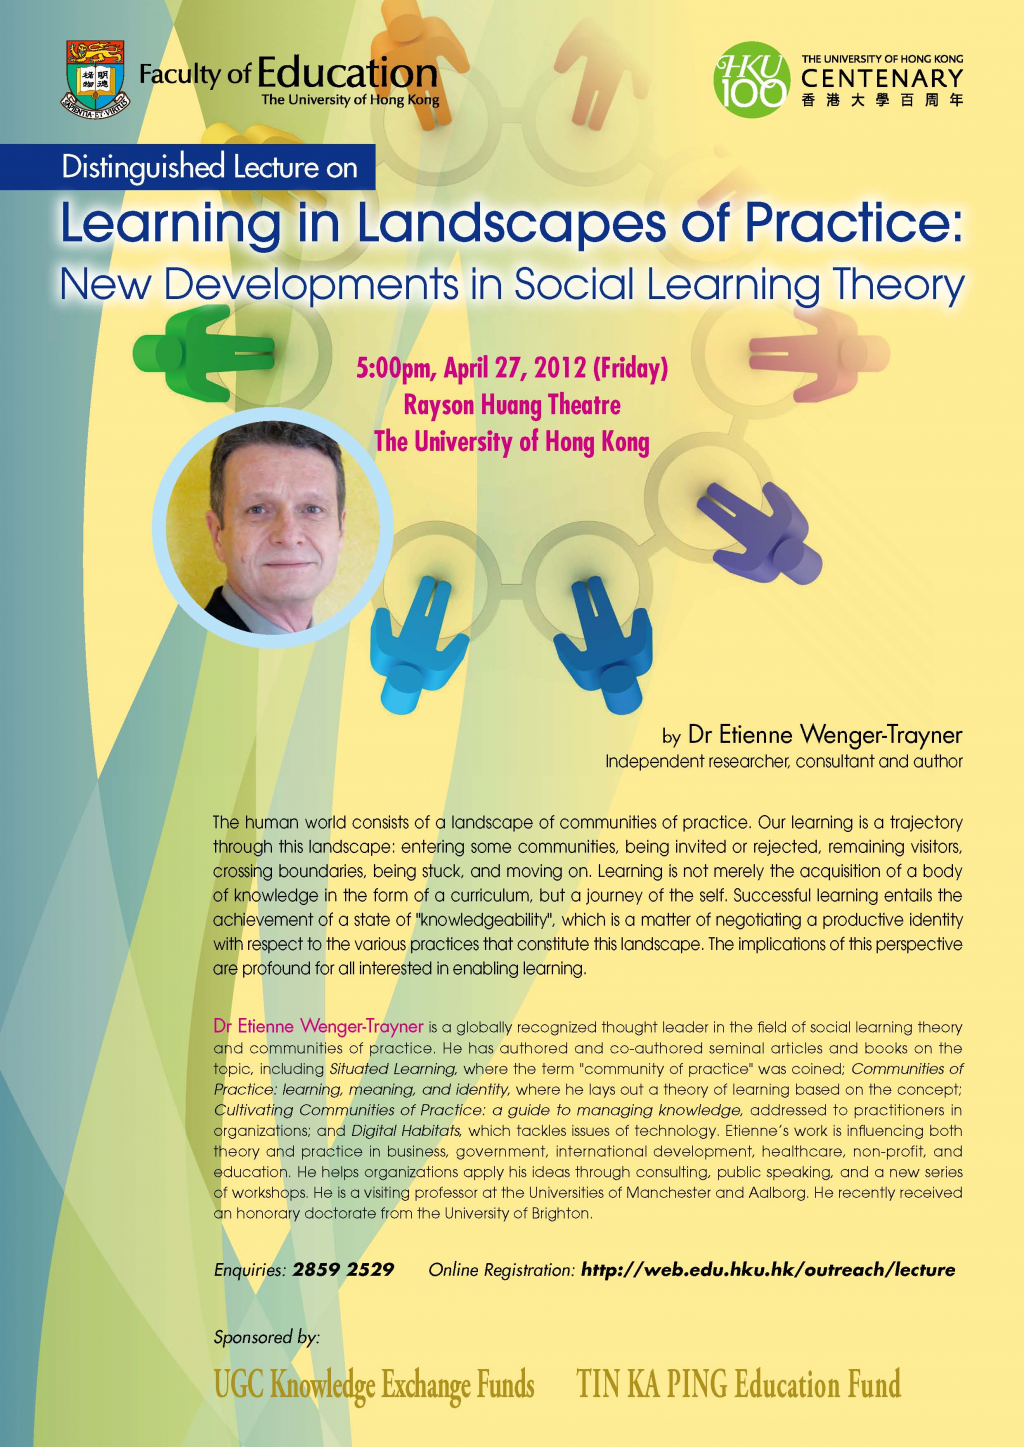 Distinguished Lecture on Learning in Landscapes of Practice: New Developments in Social Learning Theory